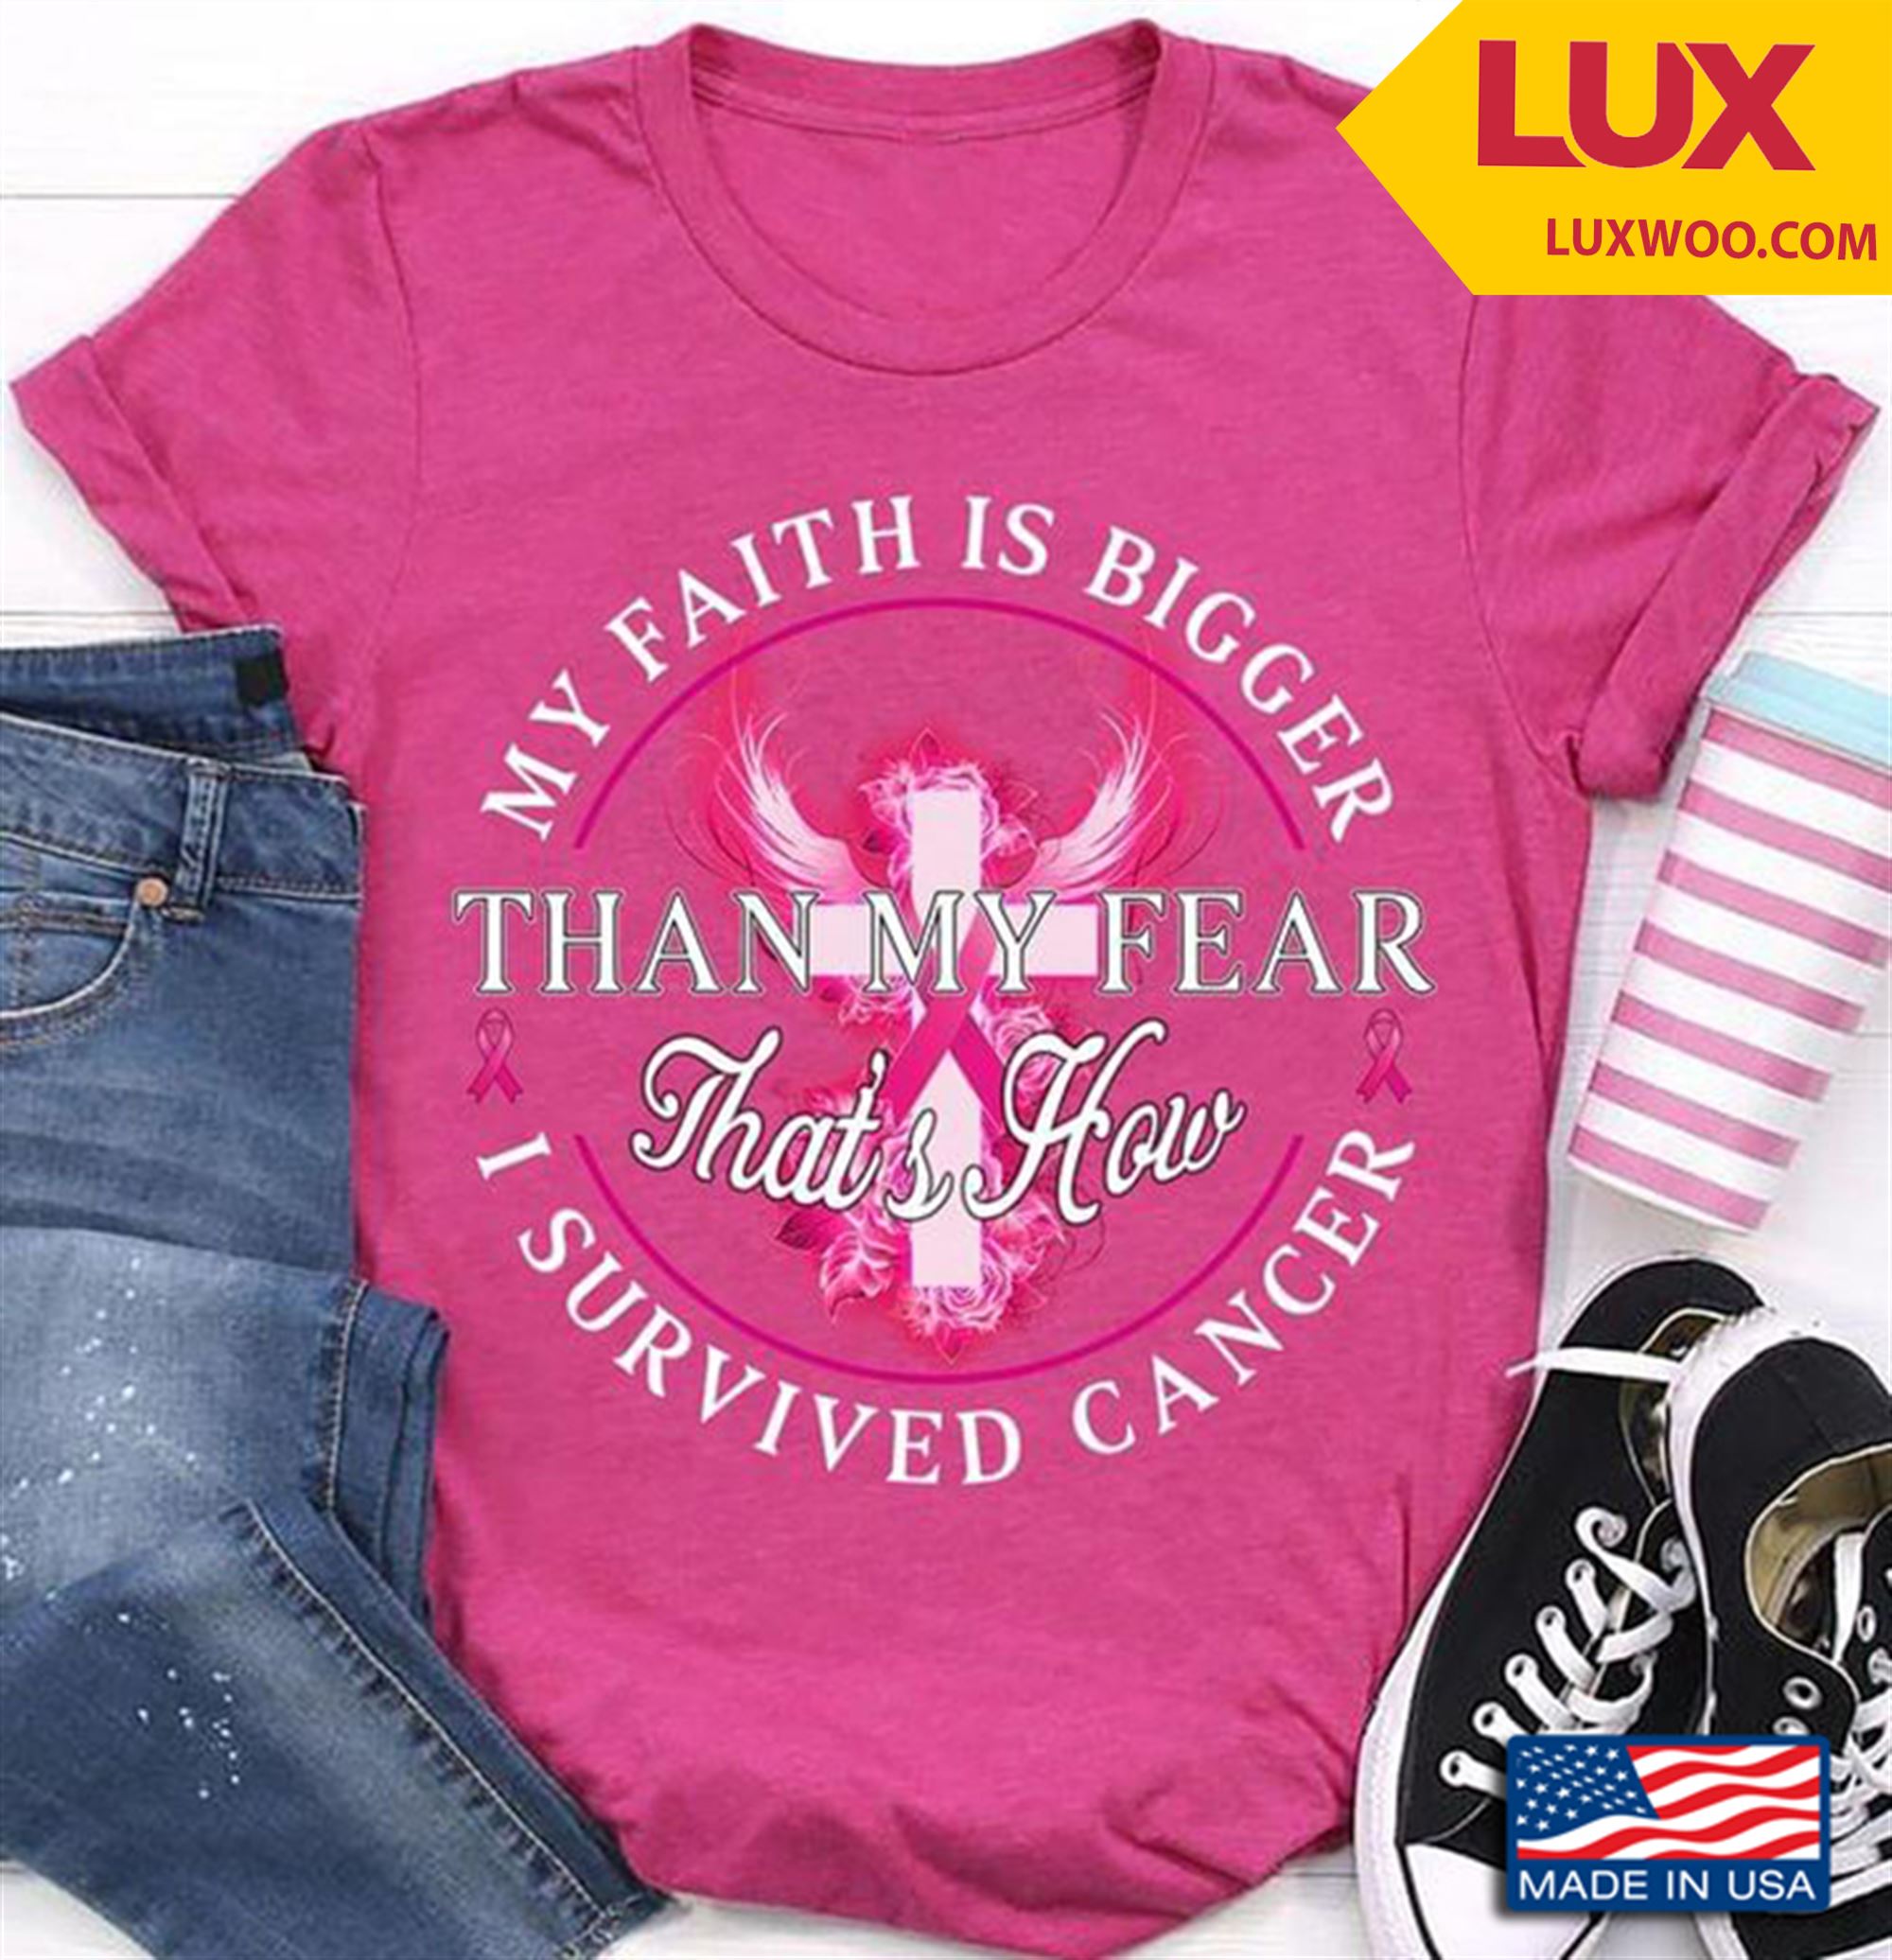 Breast Cancer Awareness My Faith Is Bigger Than My Fear Thats How I Survived Cancer Tshirt Size Up To 5xl